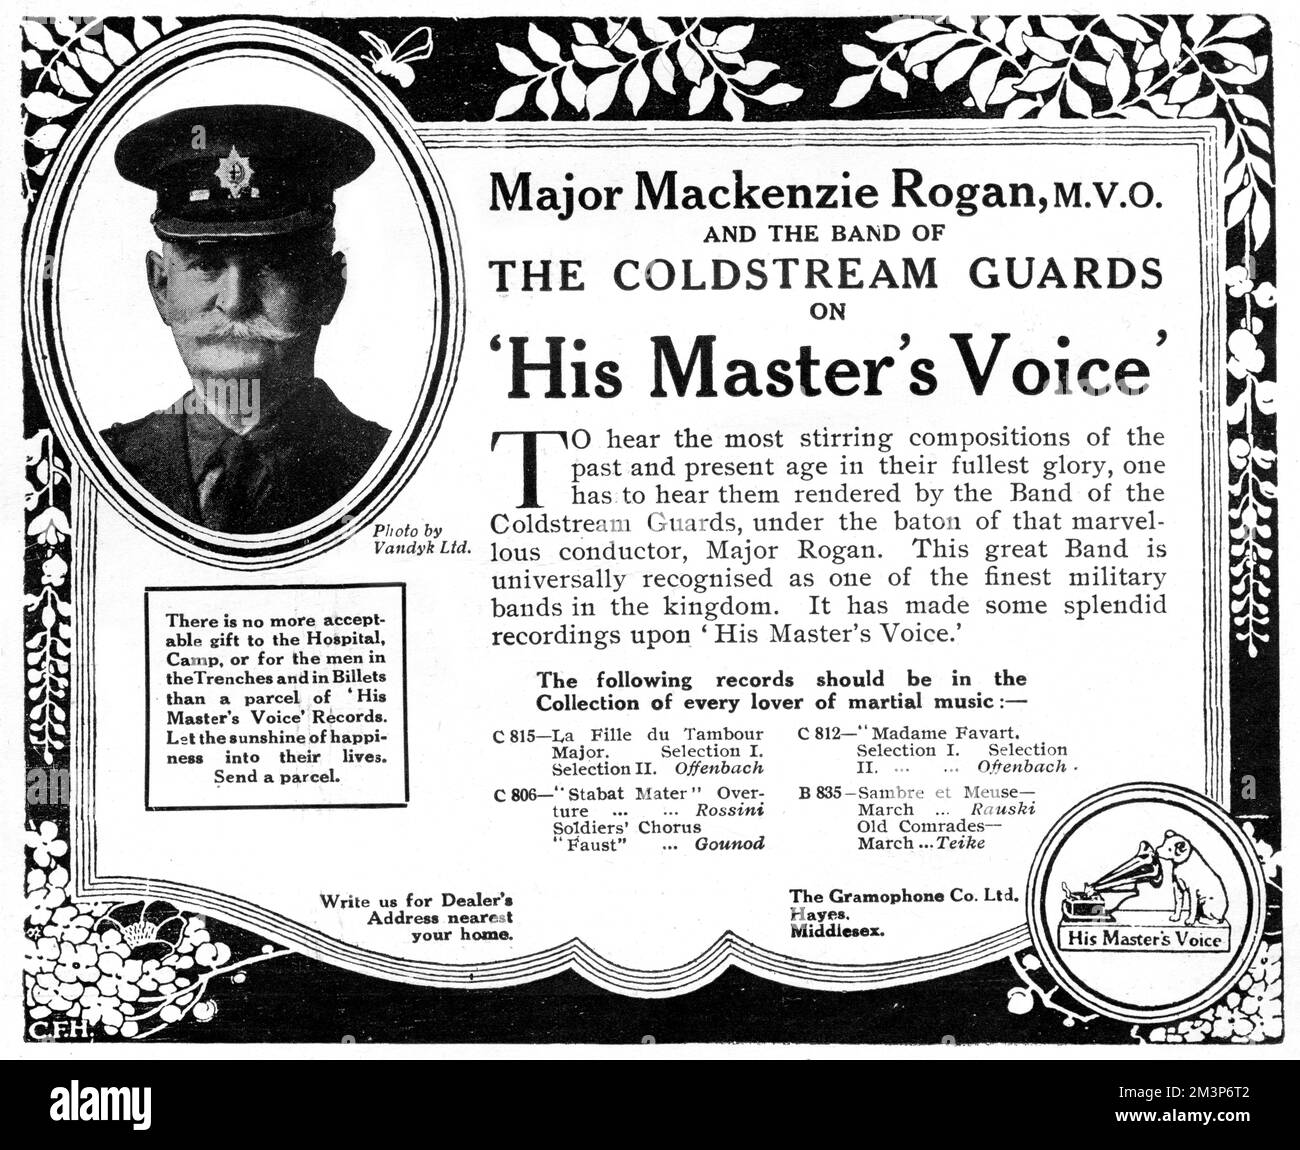 Advertisement for a recording on His Master's Voice music label during World War One, of Major Mackenzie Rogan and the band of the Coldstream Guards, playing, 'the most stirring composition of the past and present age in their fullest glory.'  The advert suggests the music is an acceptable gift to  soldiers in hospital, at camp, in the trenches and in billets and will 'bring a little sunshine of happiness into their lives.'     Date: 1918 Stock Photo